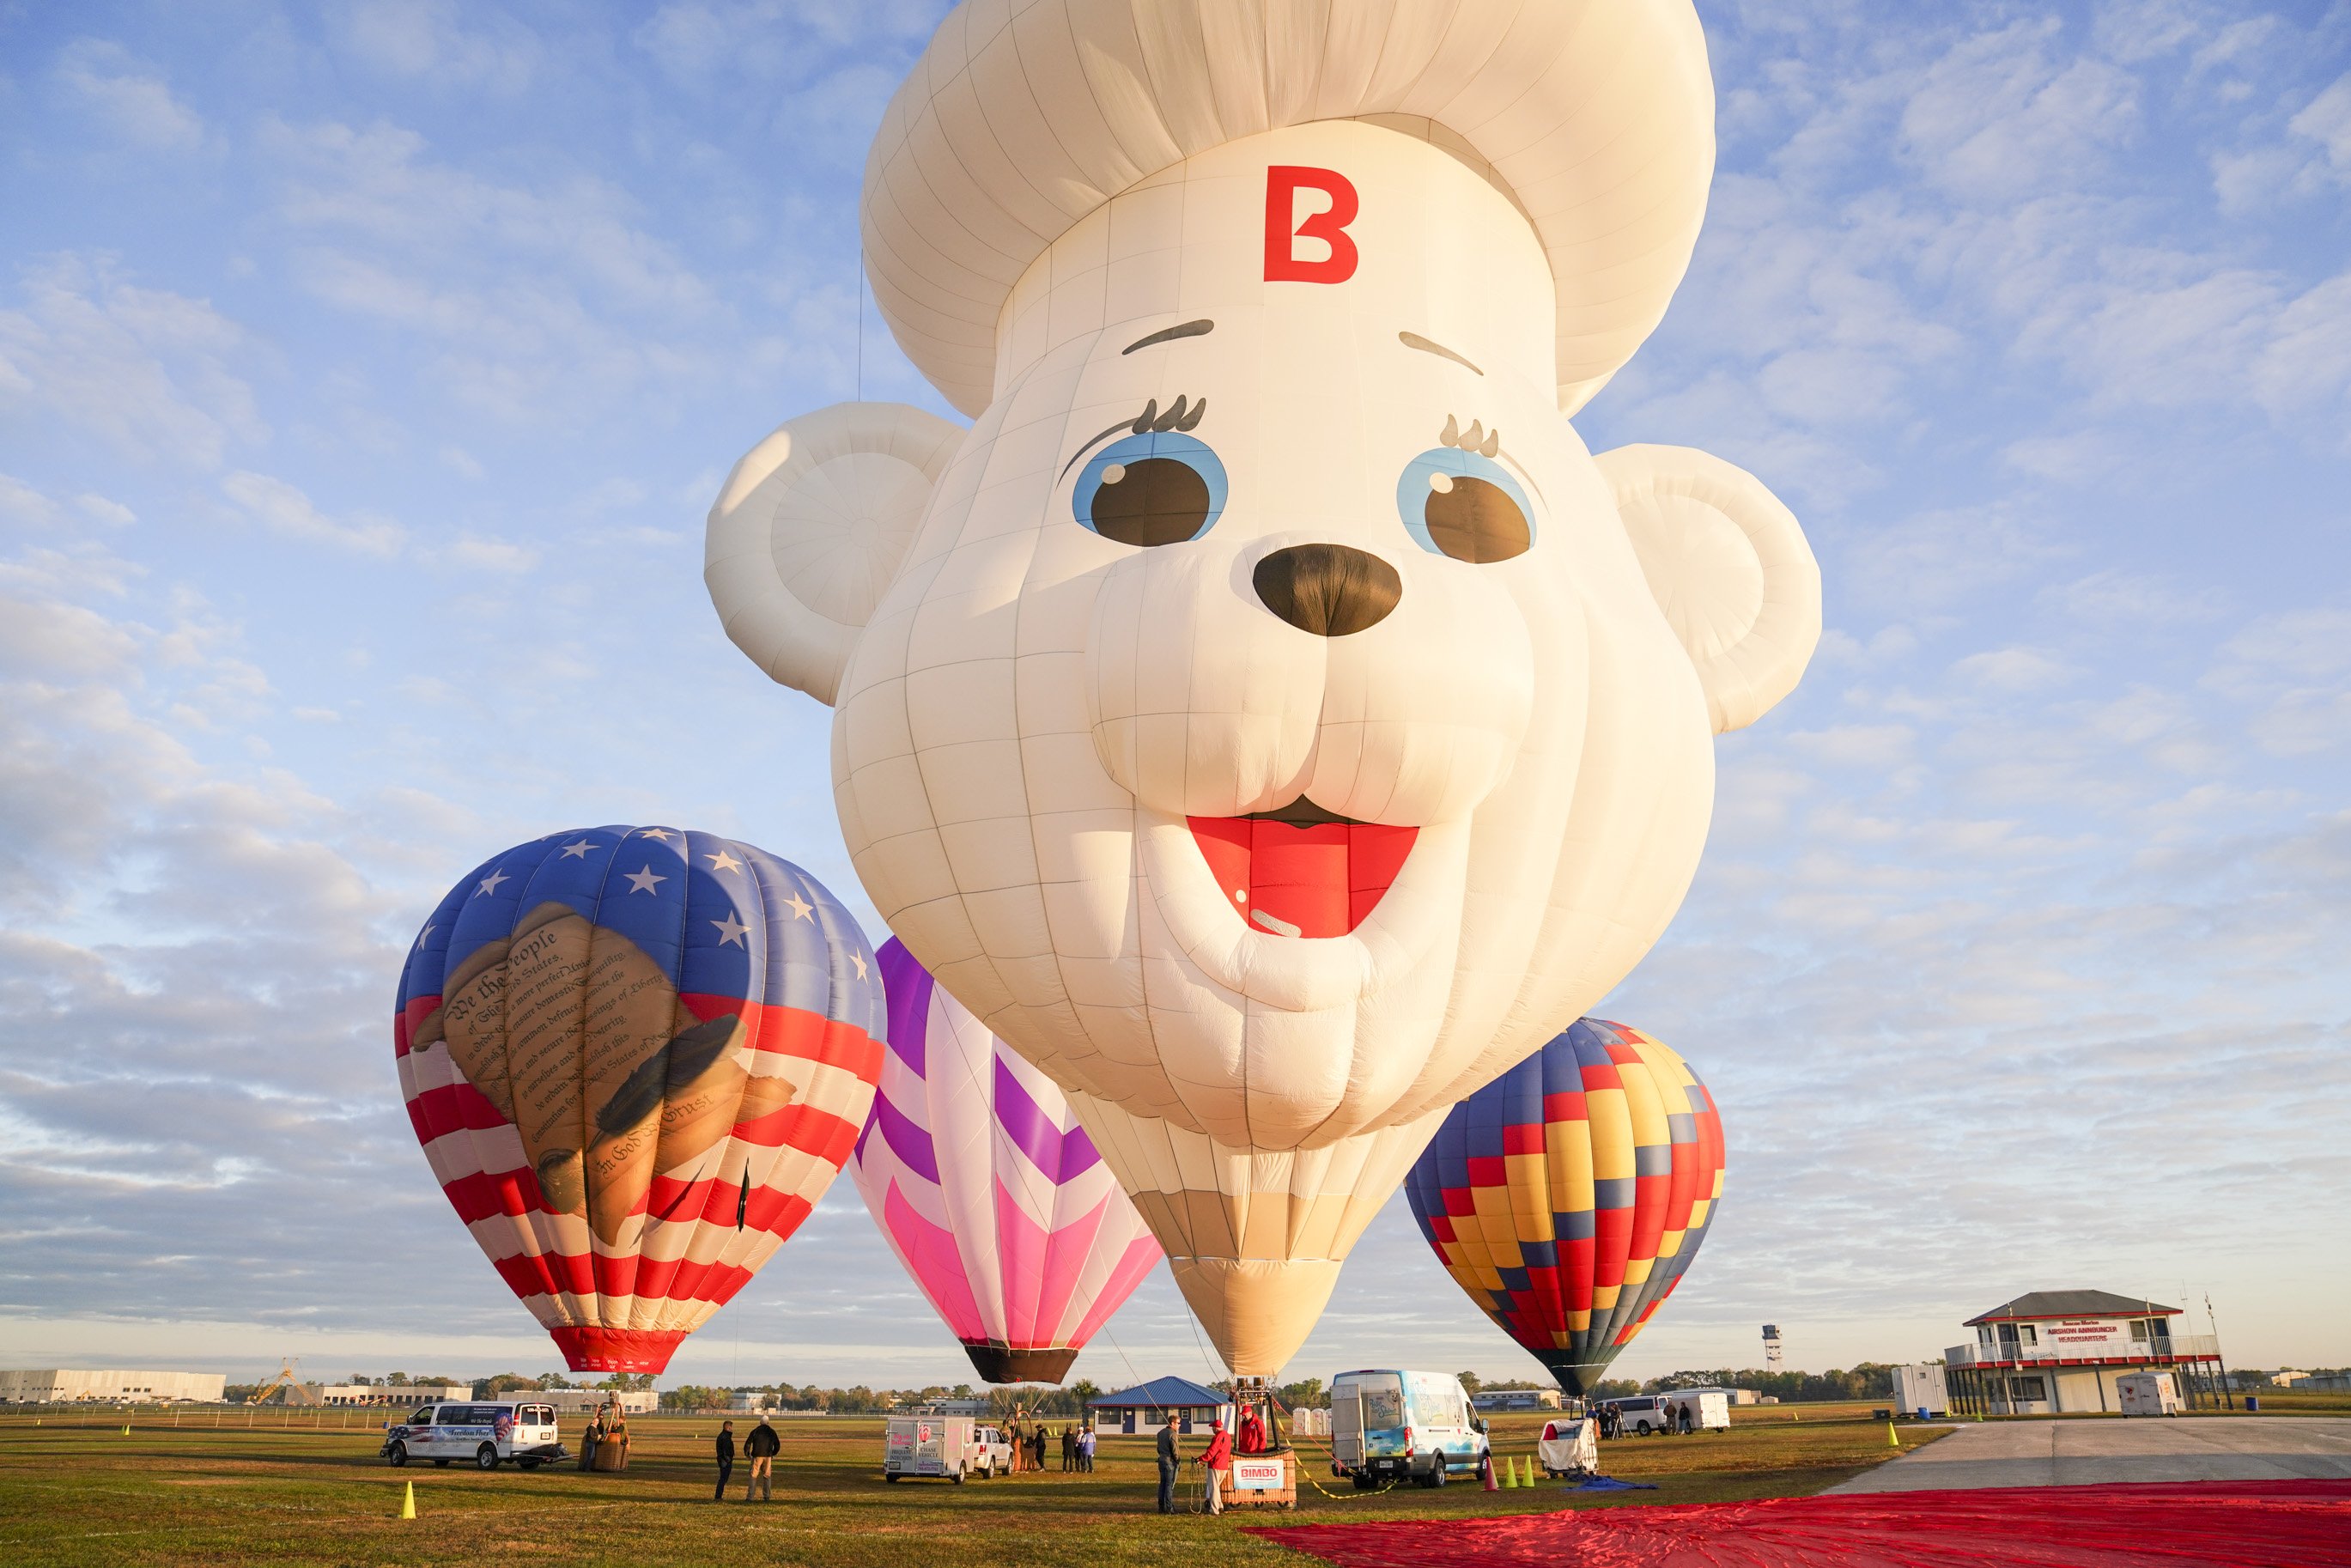 Springtime In Florida Is Dreamy For Hot Air Ballooning